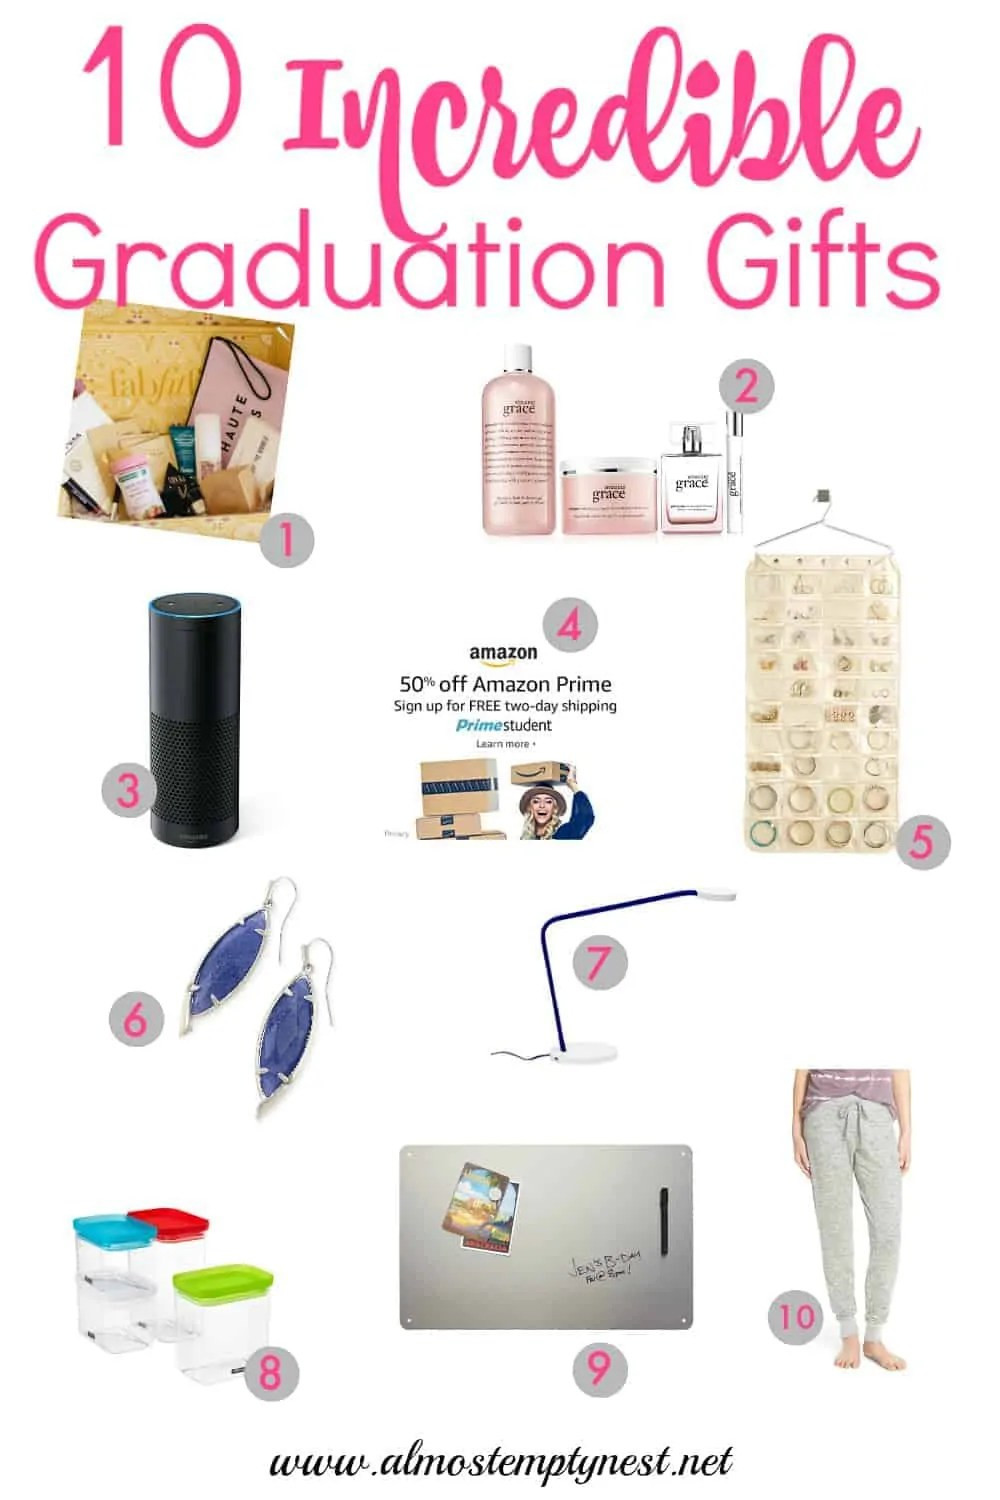 Graduation Gift Ideas For Girls
 10 Incredible Graduation Gifts for Girls Almost Empty Nest